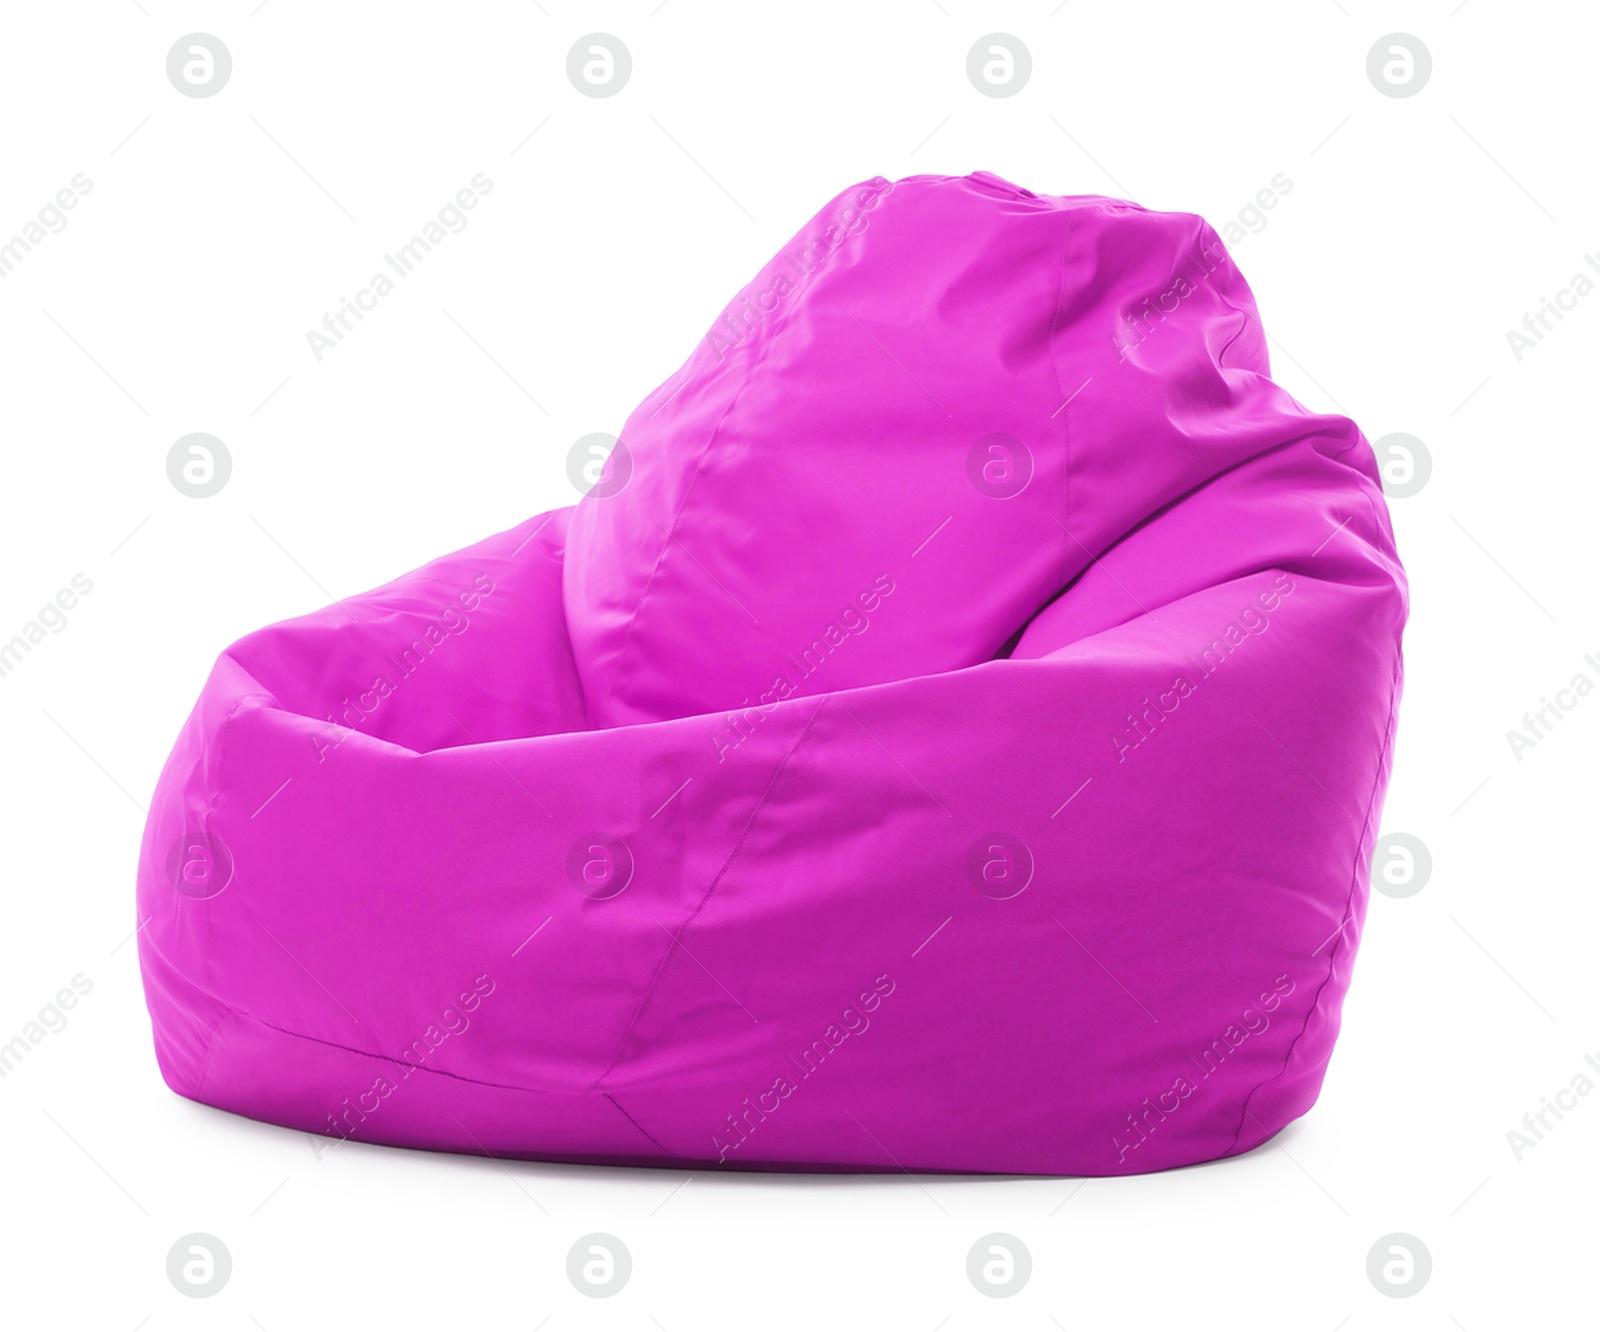 Image of One magenta bean bag chair isolated on white